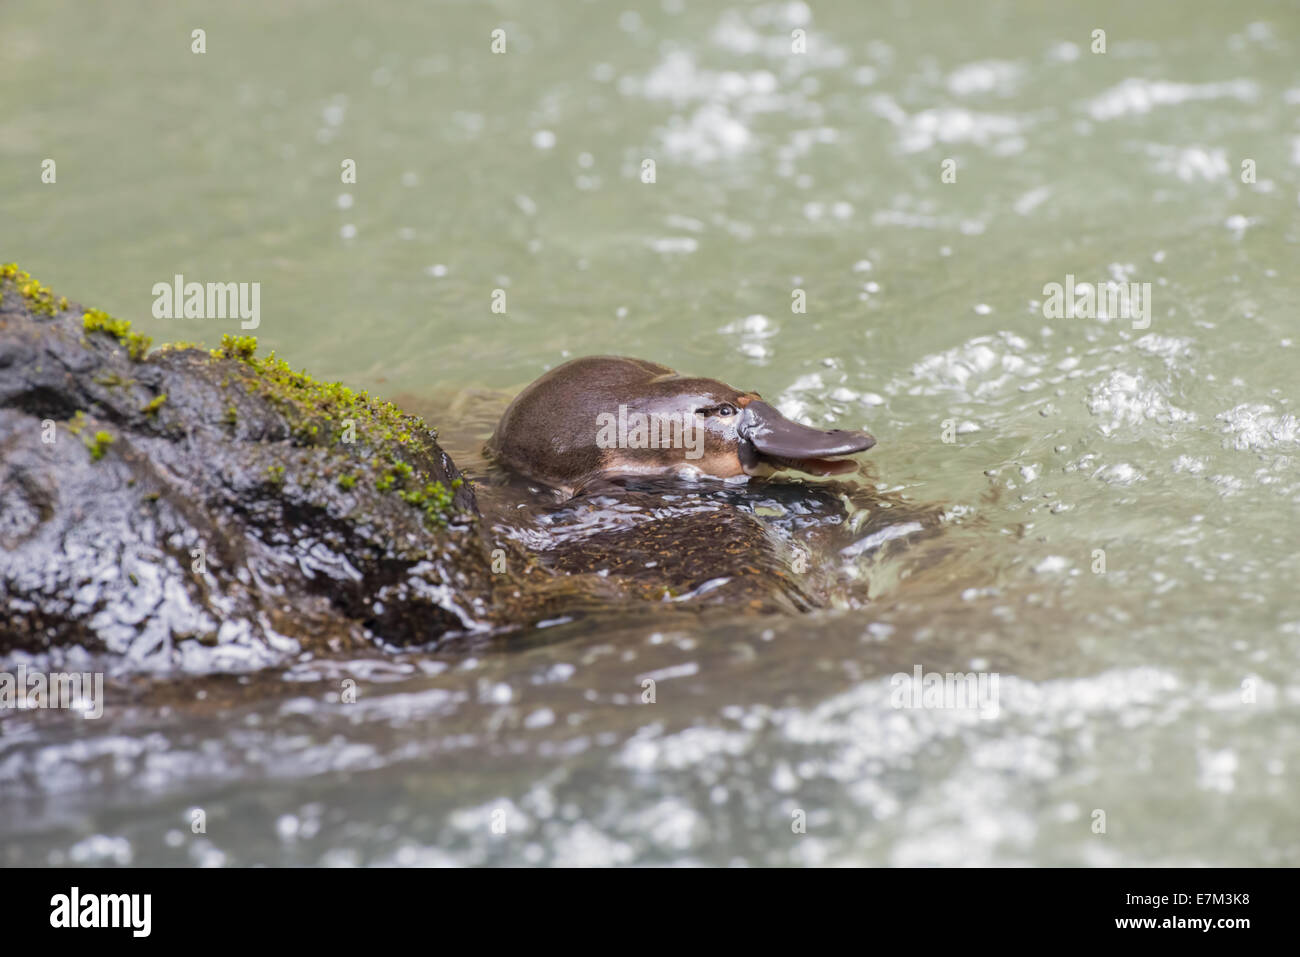 Stock photo of a duck-billed platypus climbing out of the water onto a rock, Atherton Tablelands, Queensland, Australia Stock Photo